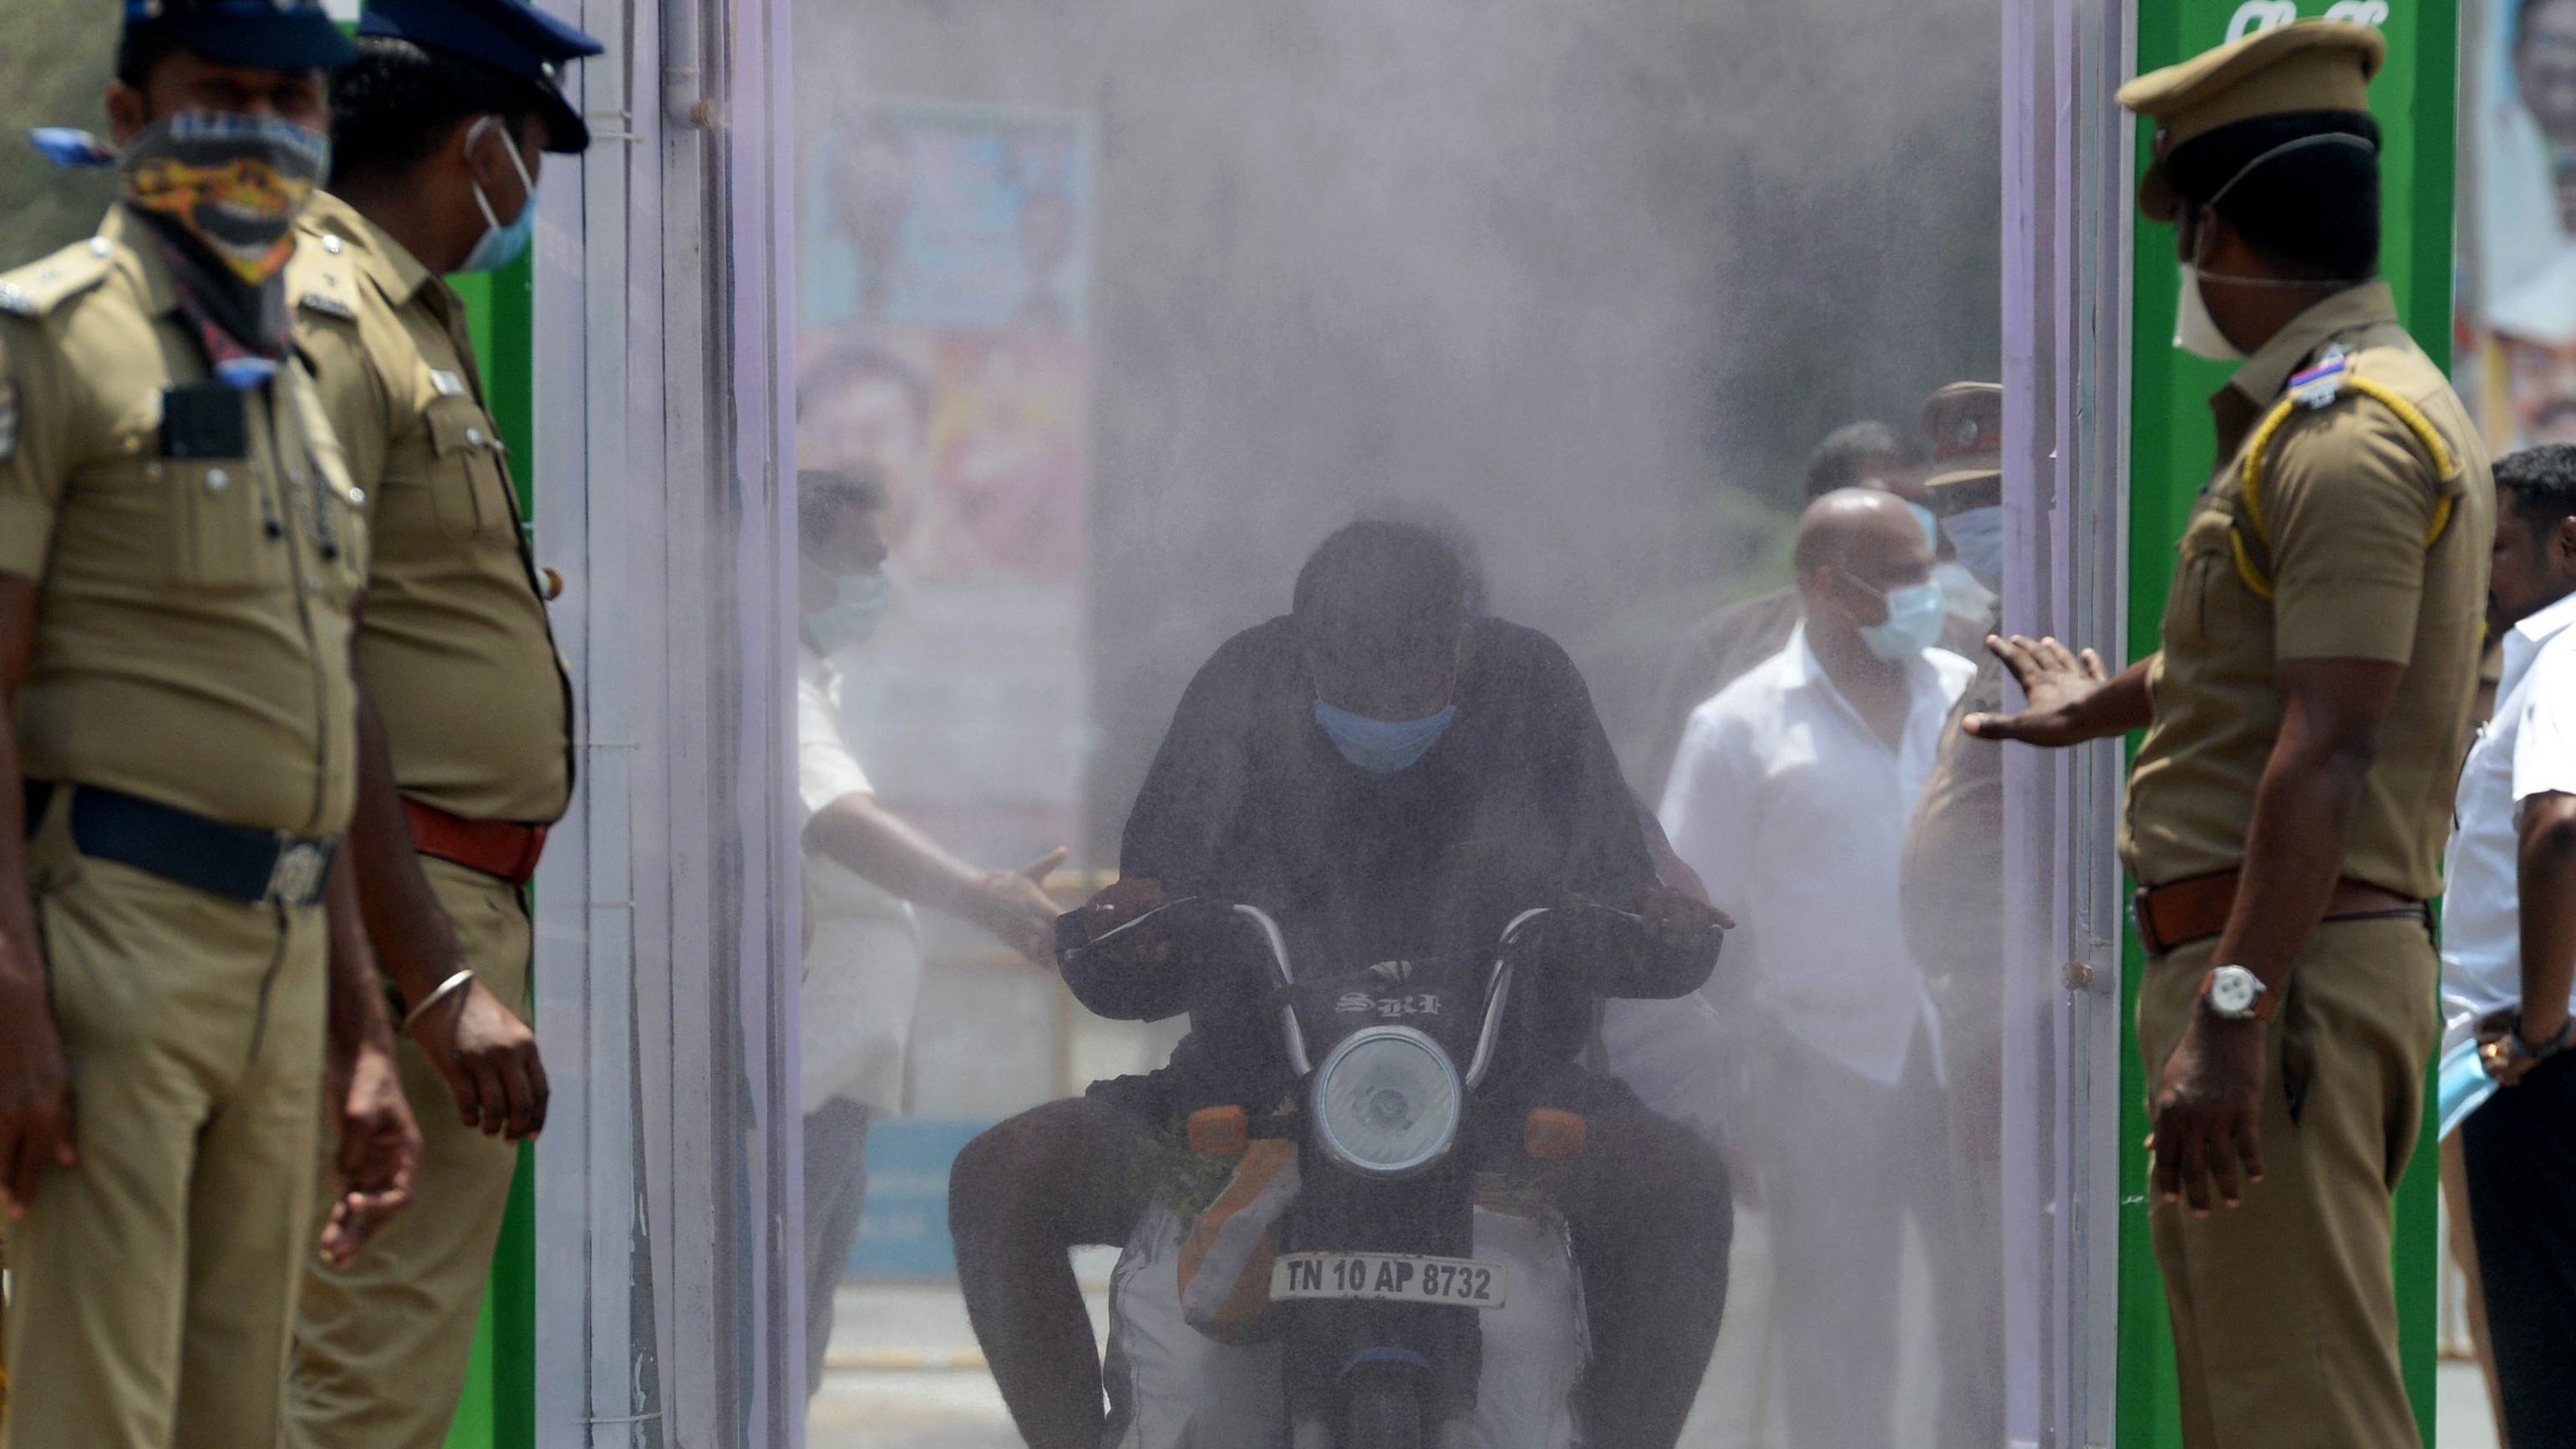 A motorcyclist rides through a disinfection tunnel in Chennai